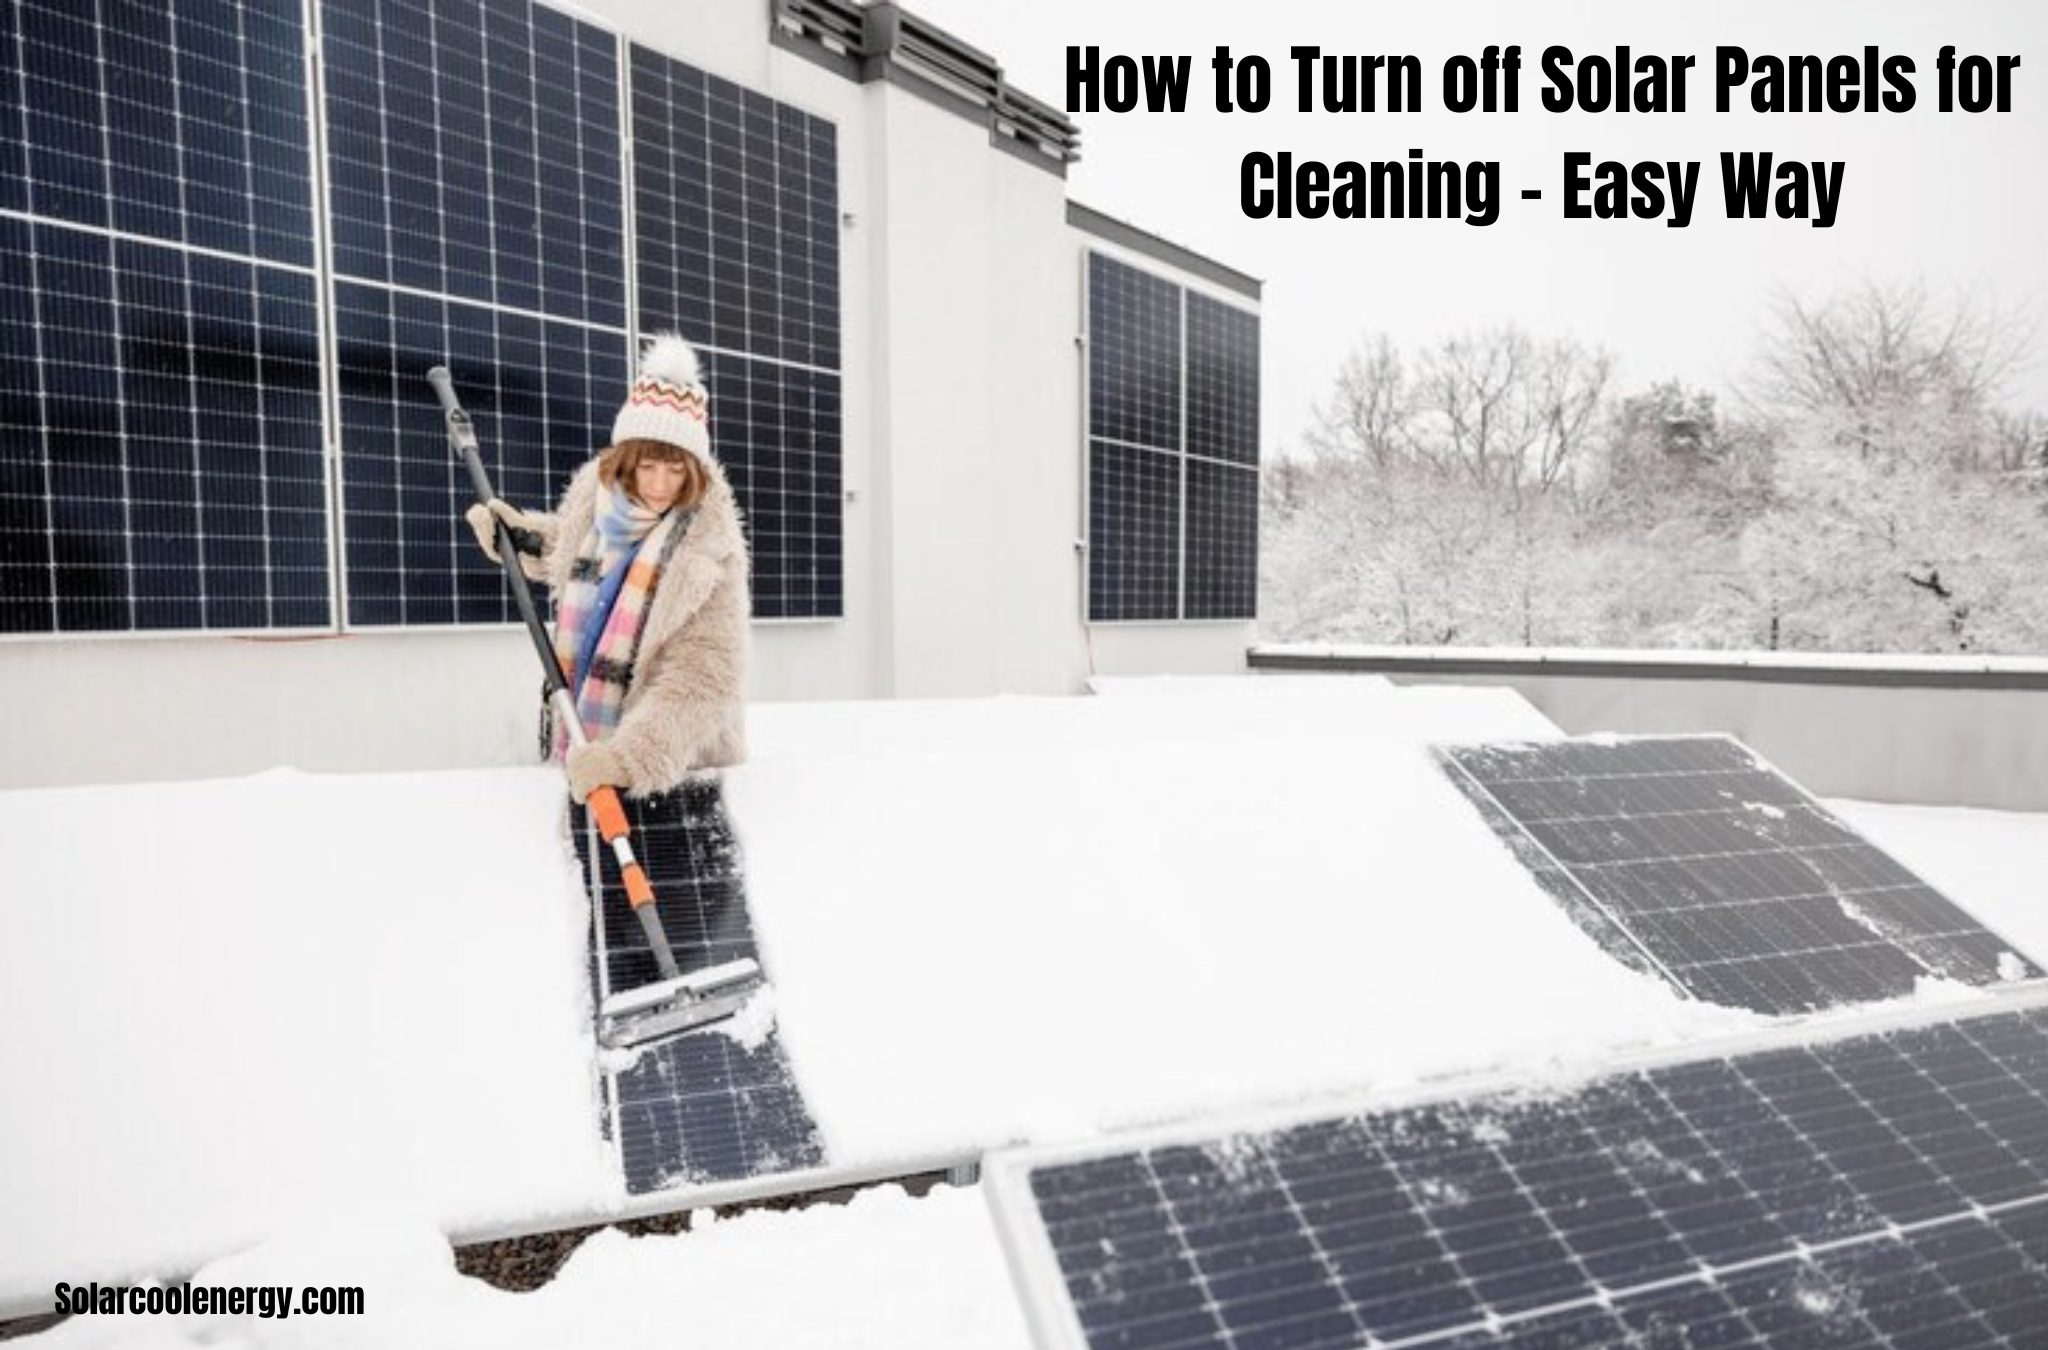 How to Turn off Solar Panels for Cleaning